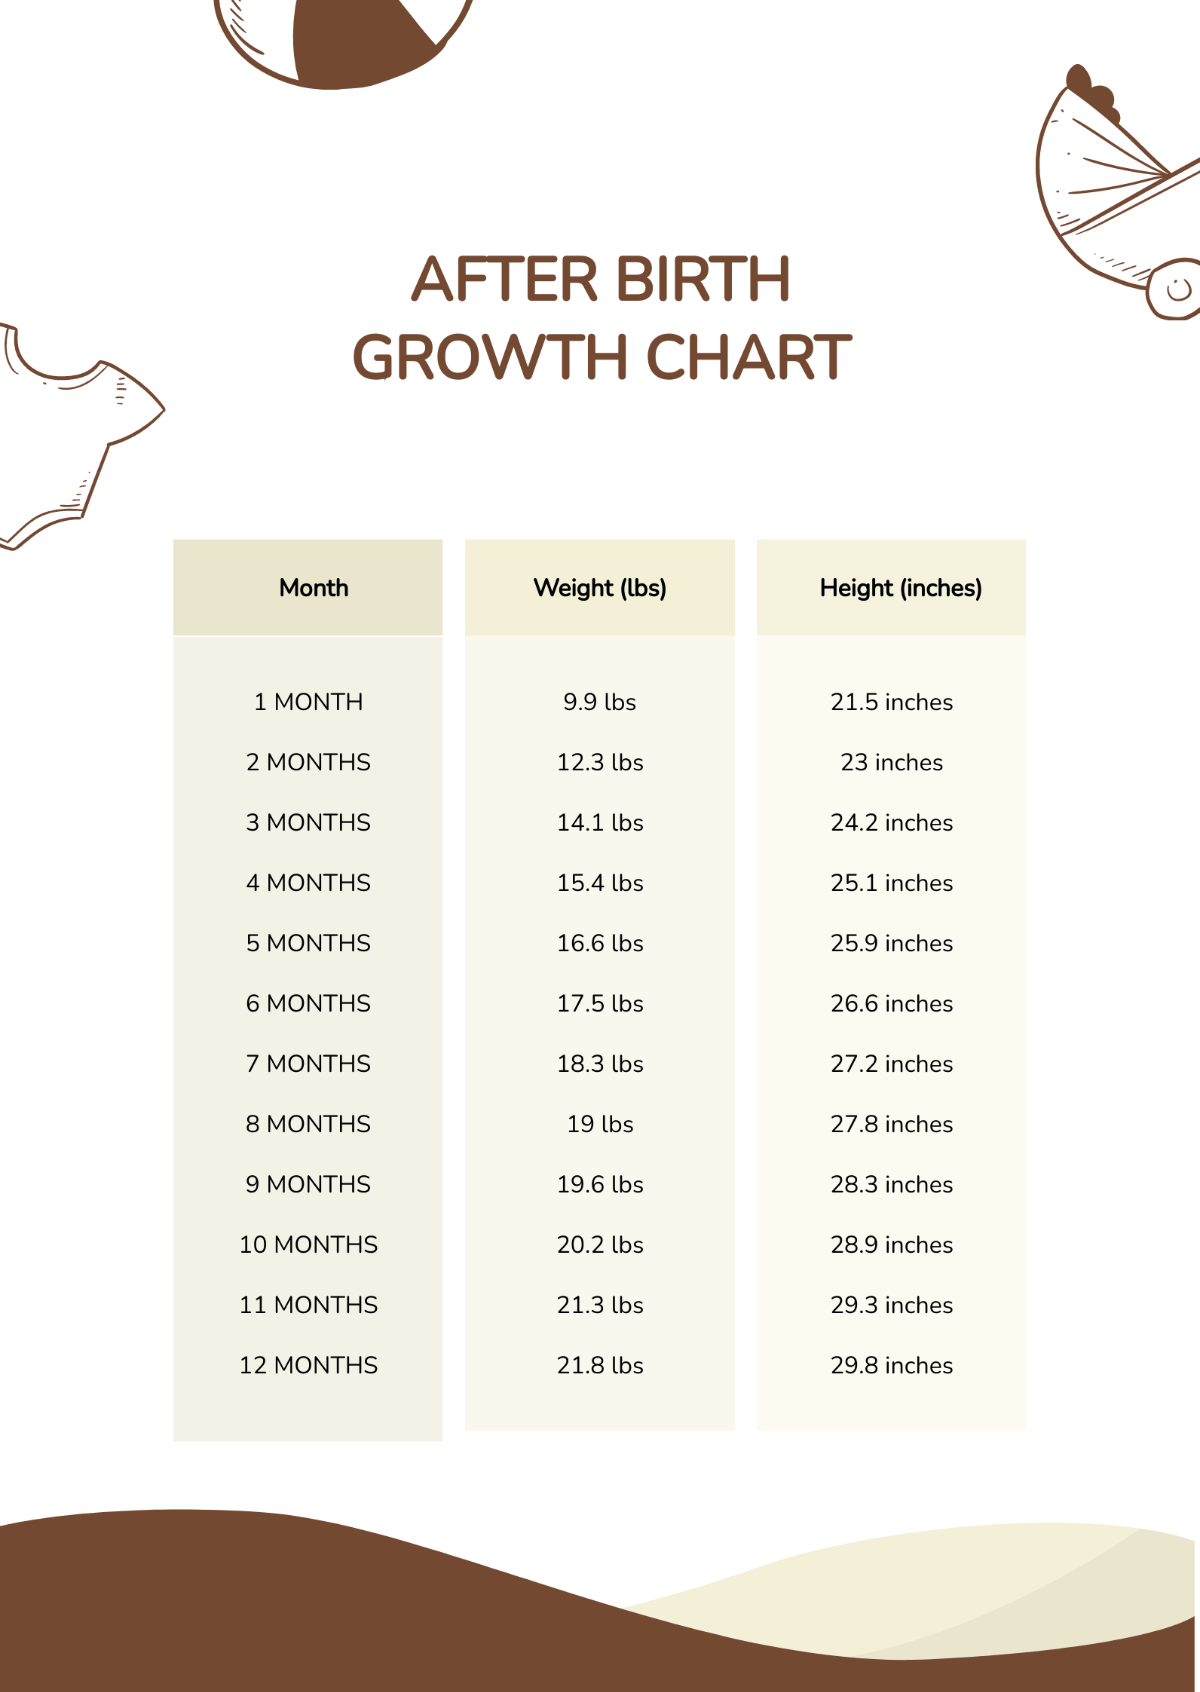 After Birth Baby Growth Chart Template